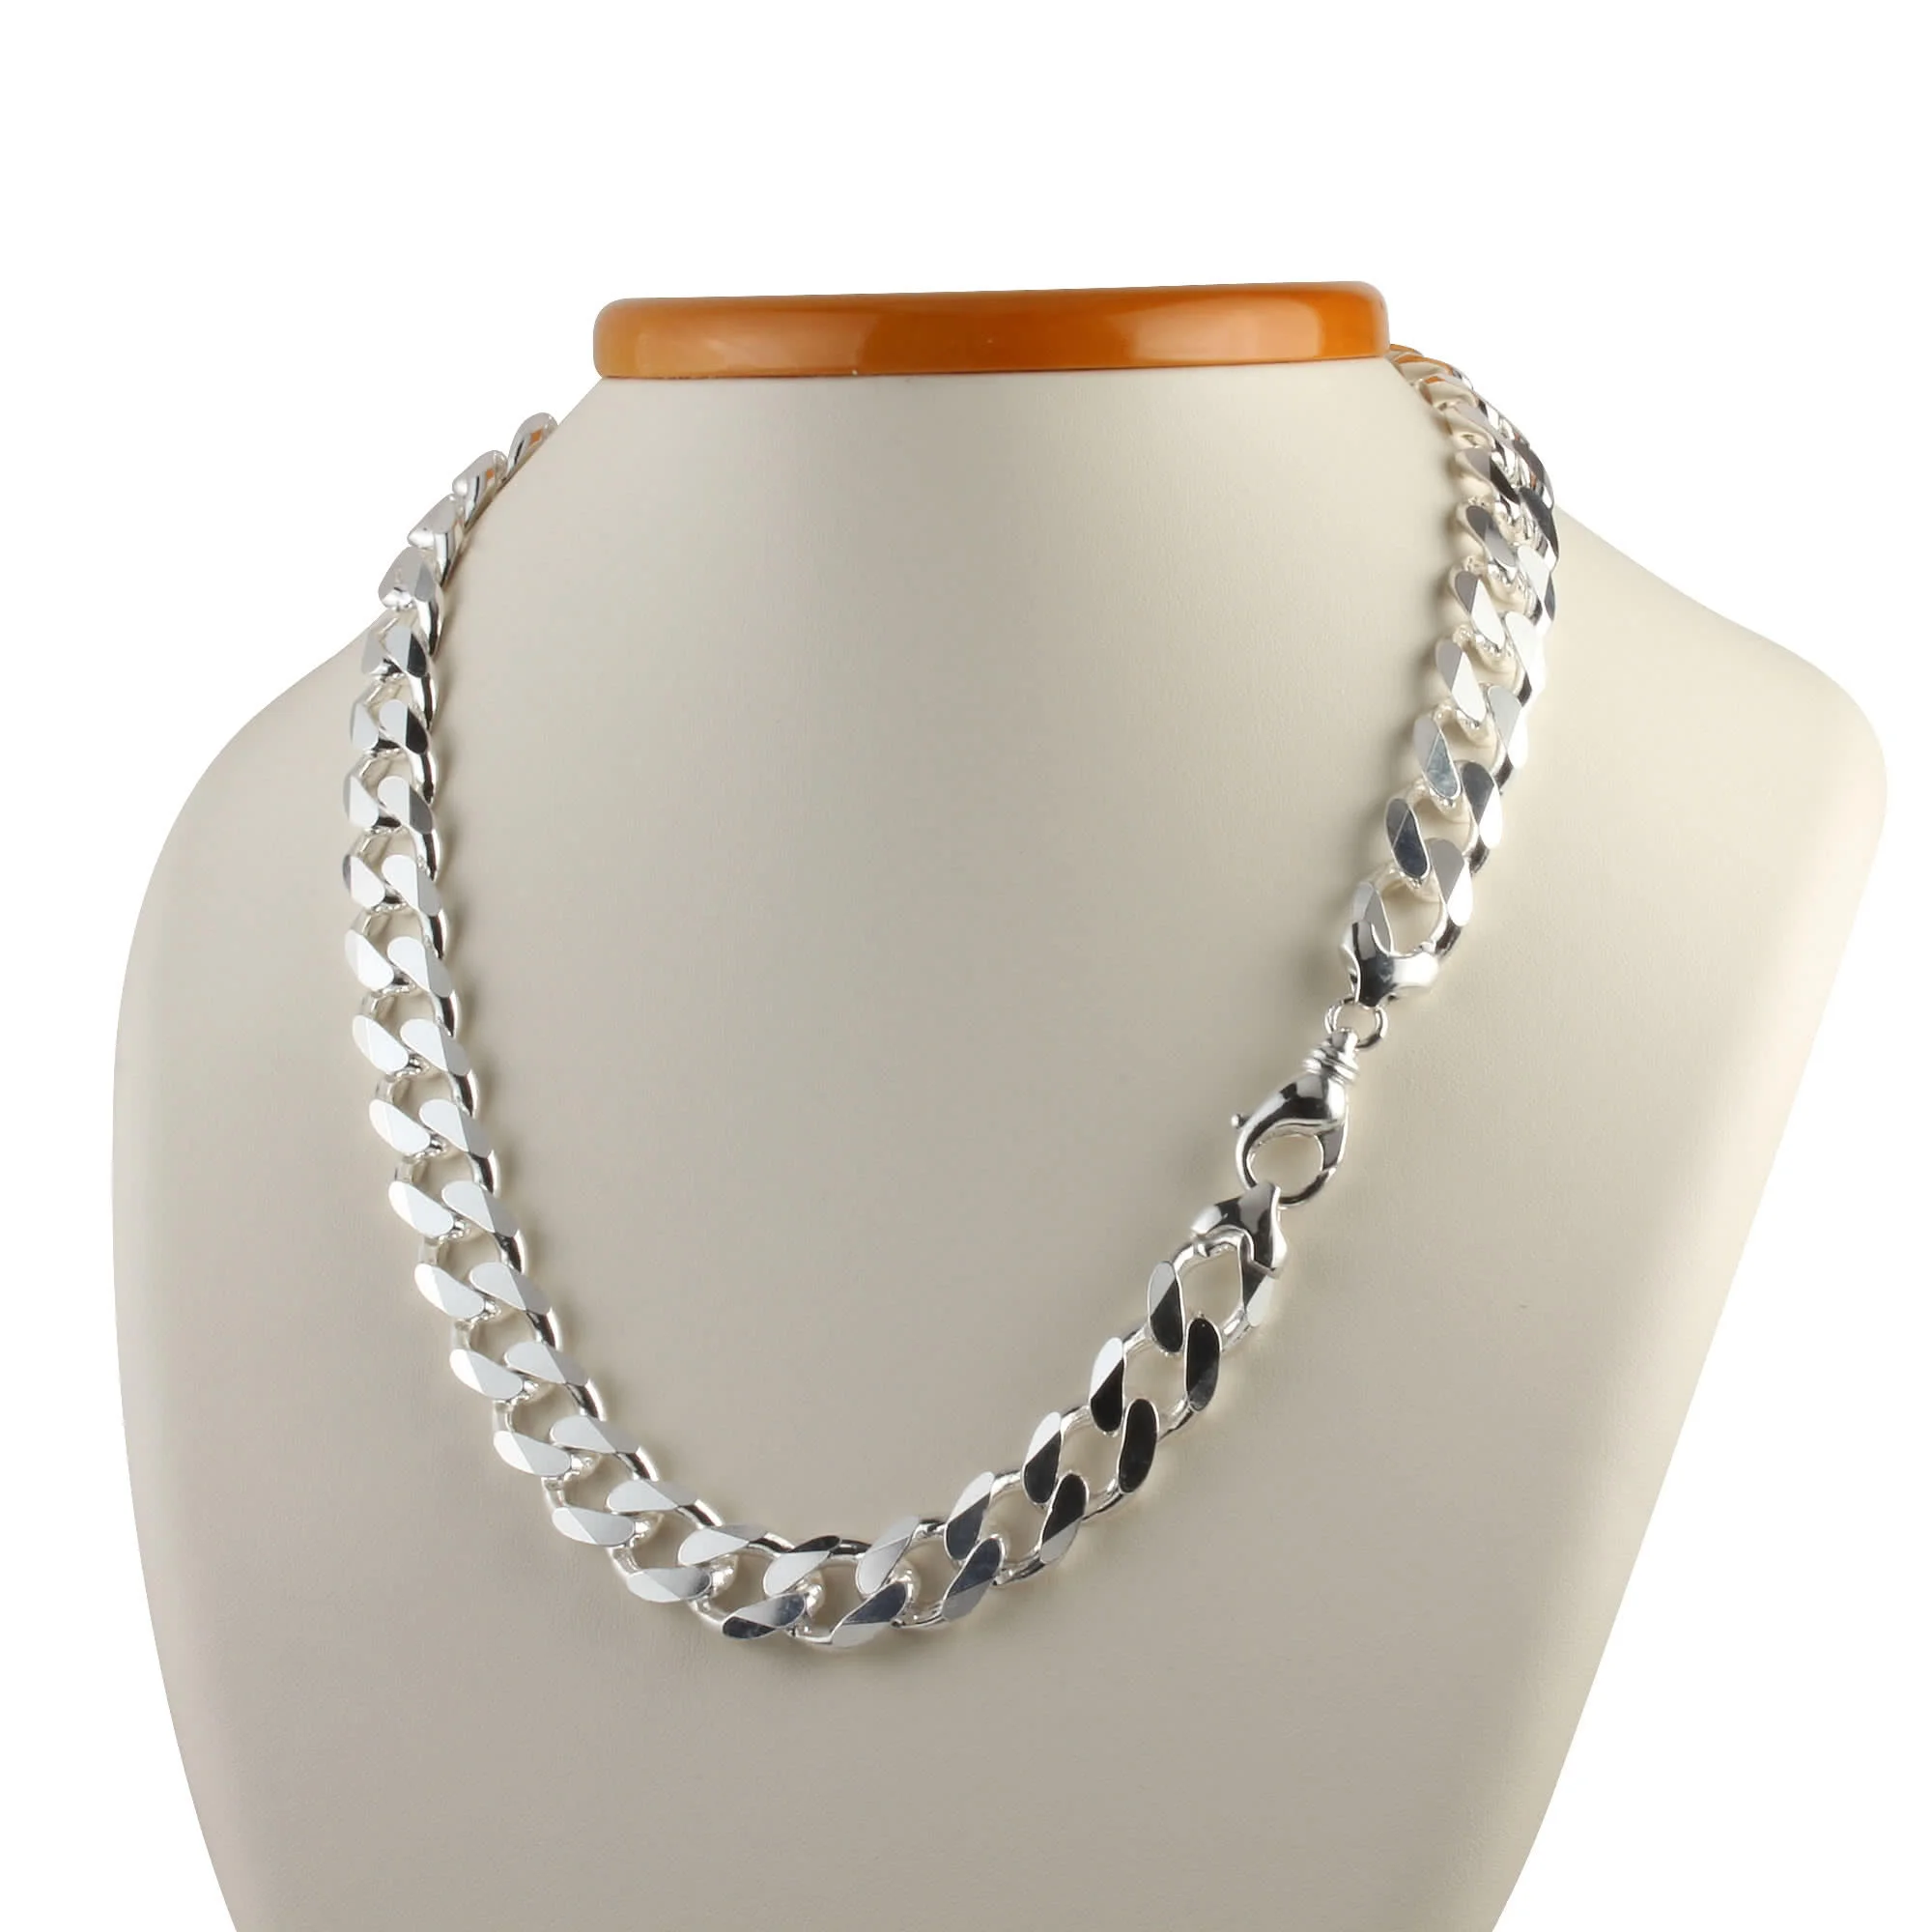 Next Level Jewelry Authentic Solid Sterling Silver Cuban Curb Link Chain Necklaces